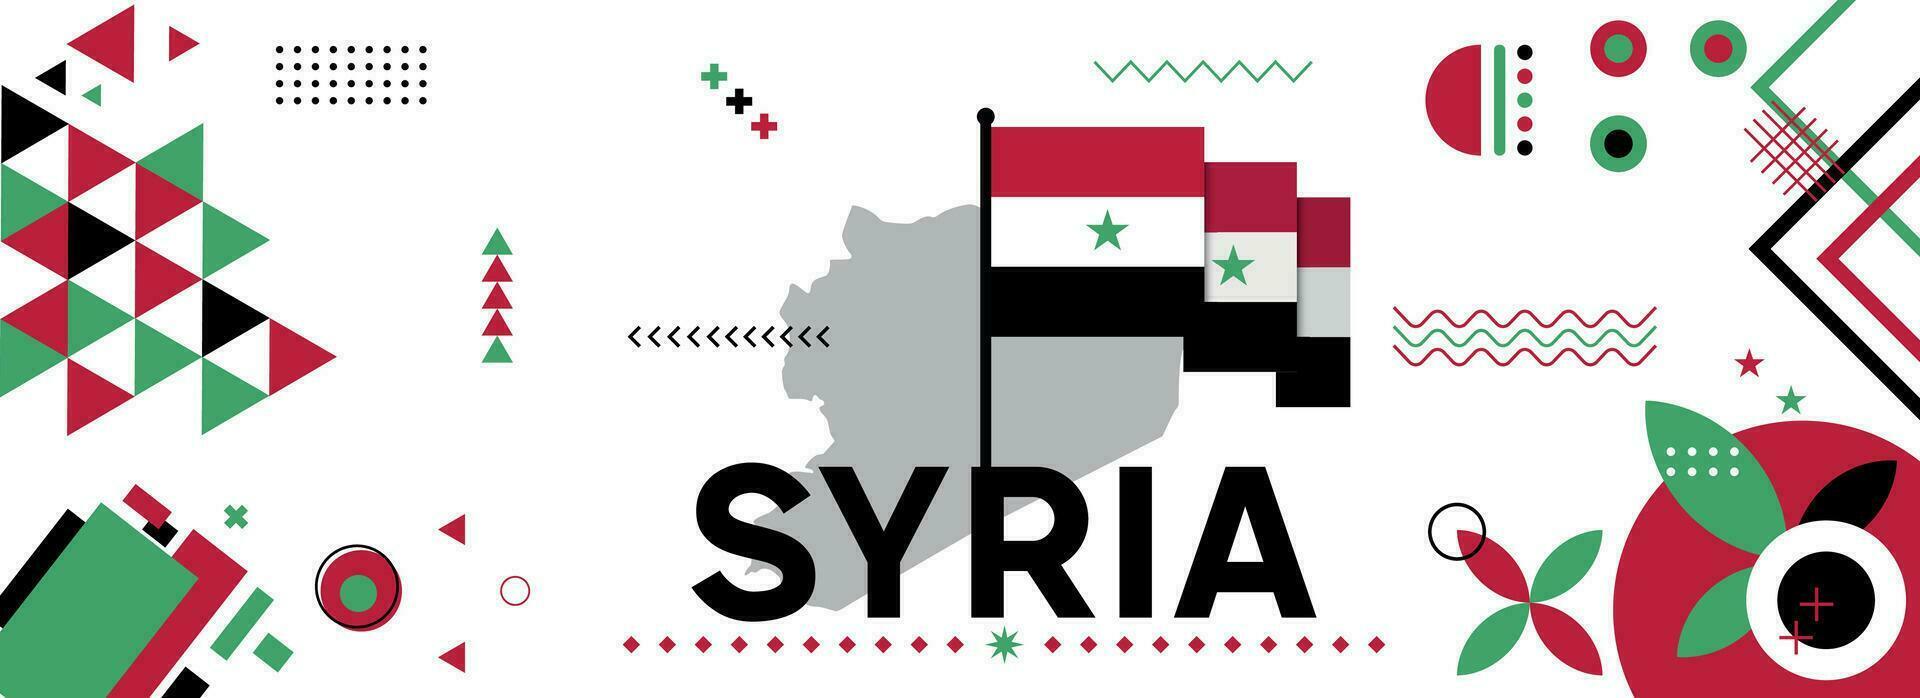 Syria national or independence day banner design for Syrian celebration. Flag and map of Syria with modern retro design and abstract geometric icons. Vector illustration